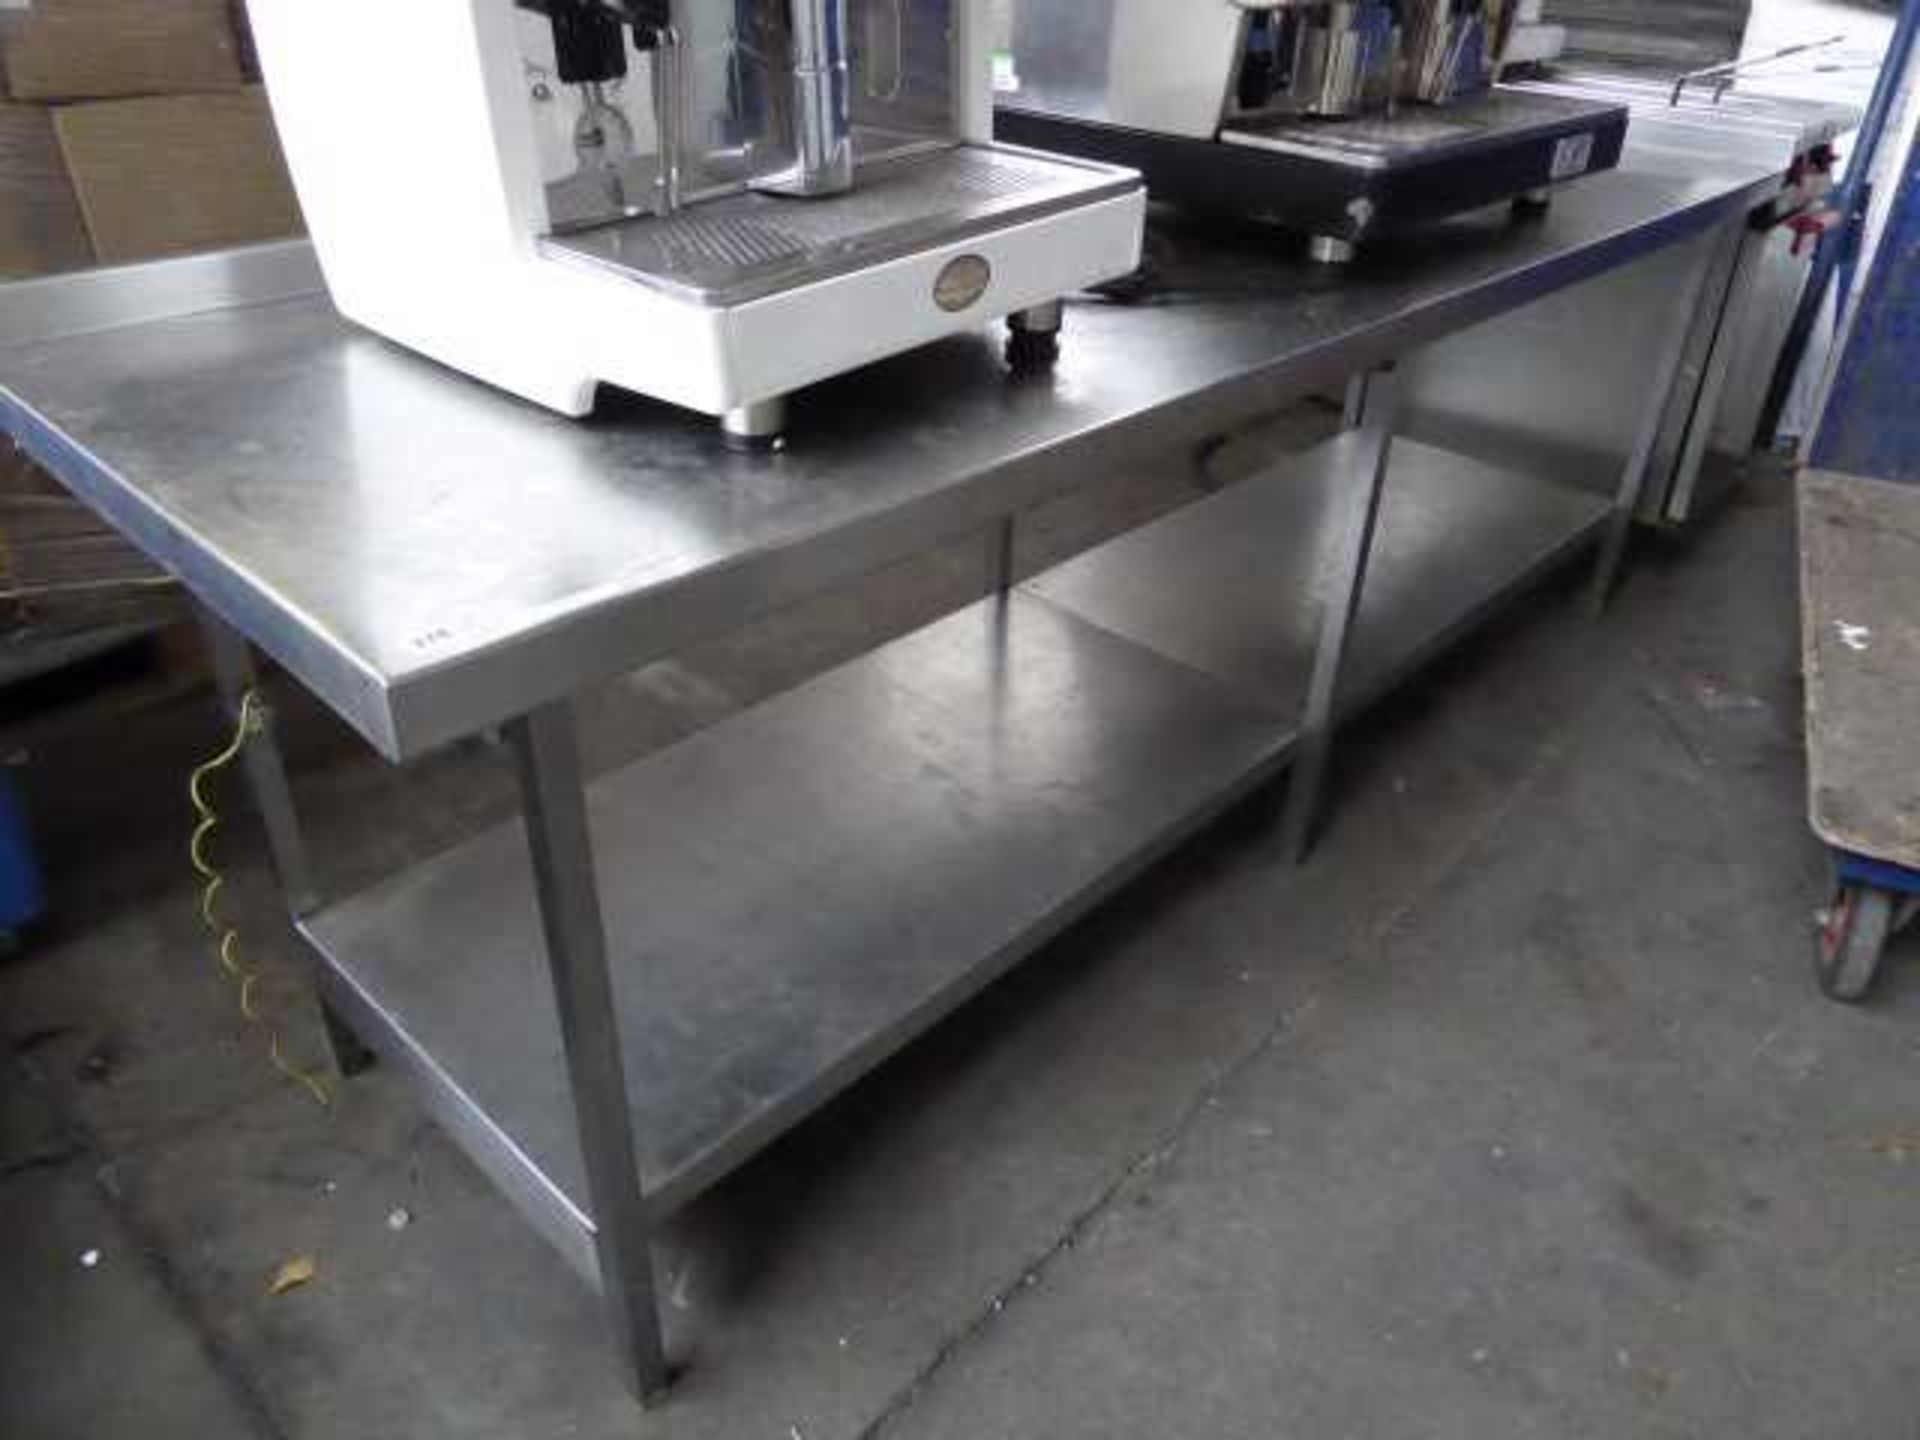 245cm stainless steel preparation table with shelf under